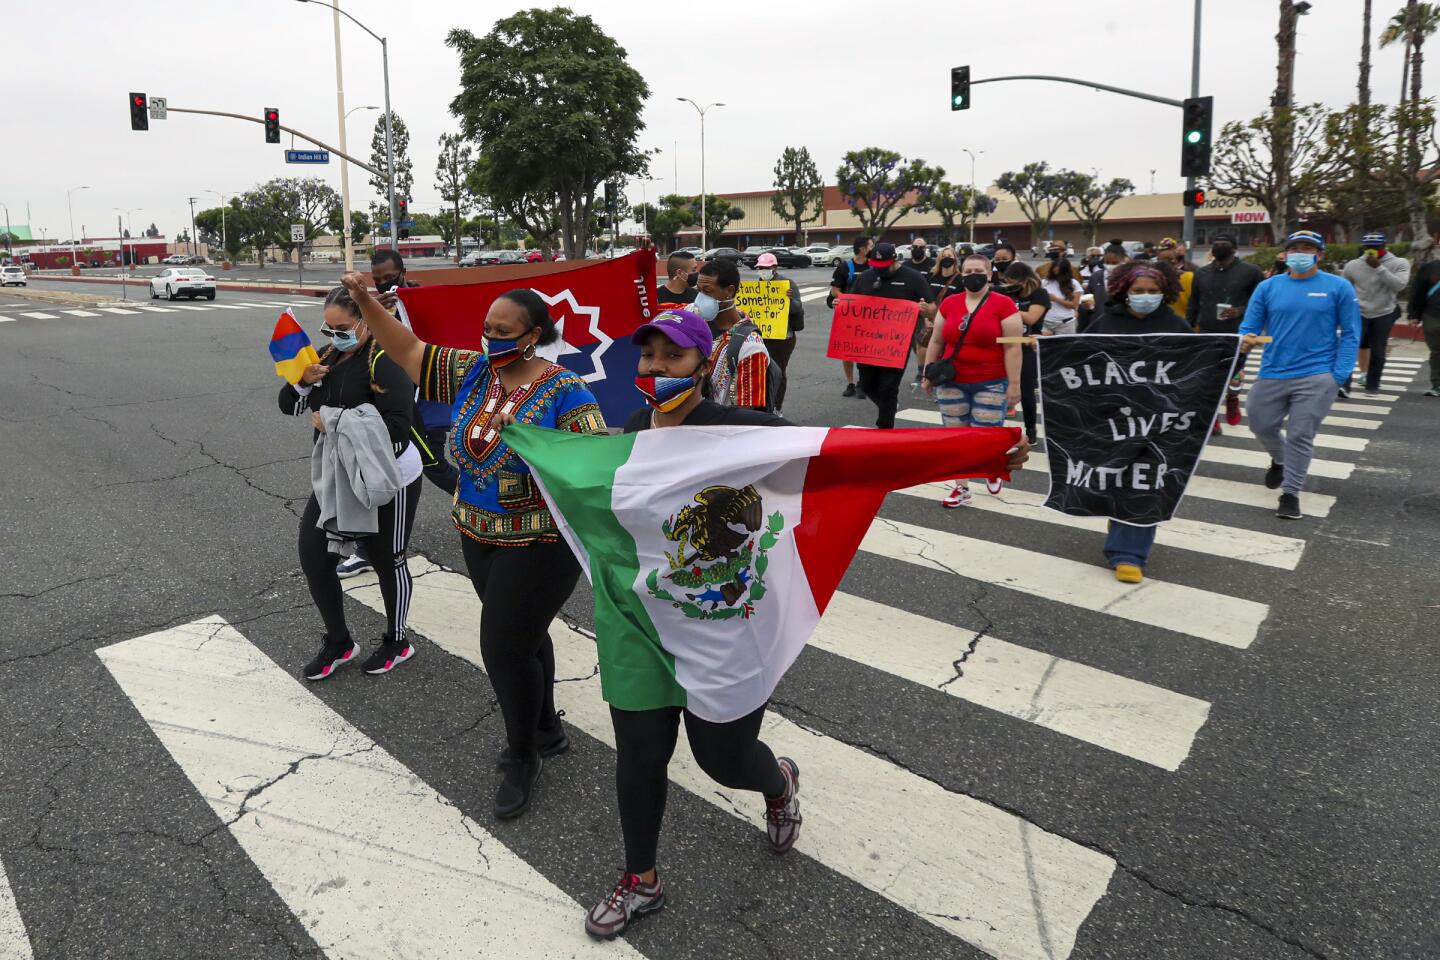 People wave flags and signs while crossing the street during a Juneteenth march in Pomona